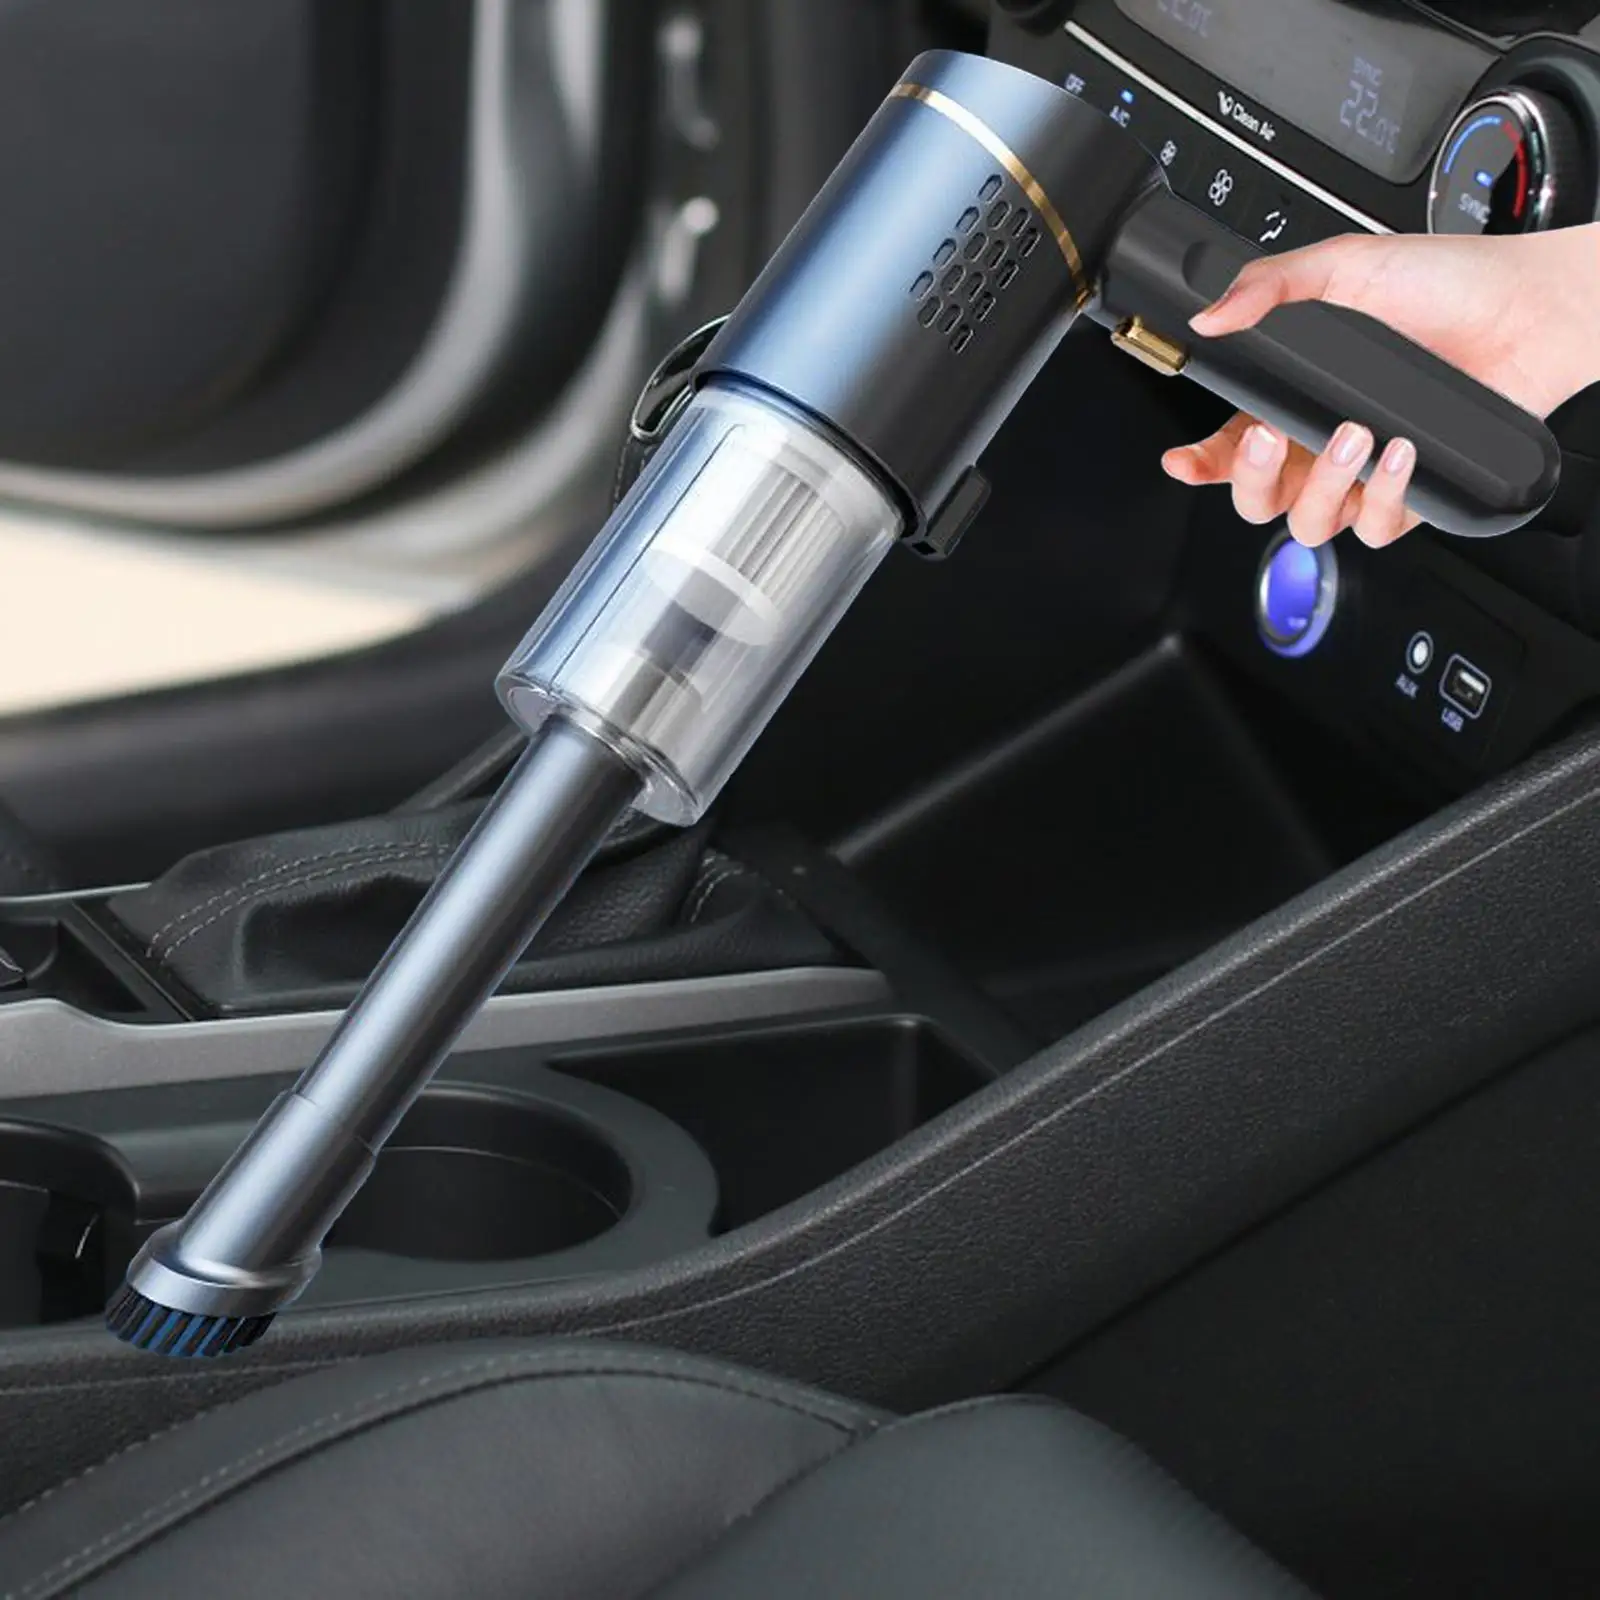 Car Vacuum Cleaner Lightweight Portable High Power Multifunction Hand Vacuum Duster for Home Keyboard Pillows Carpet Car